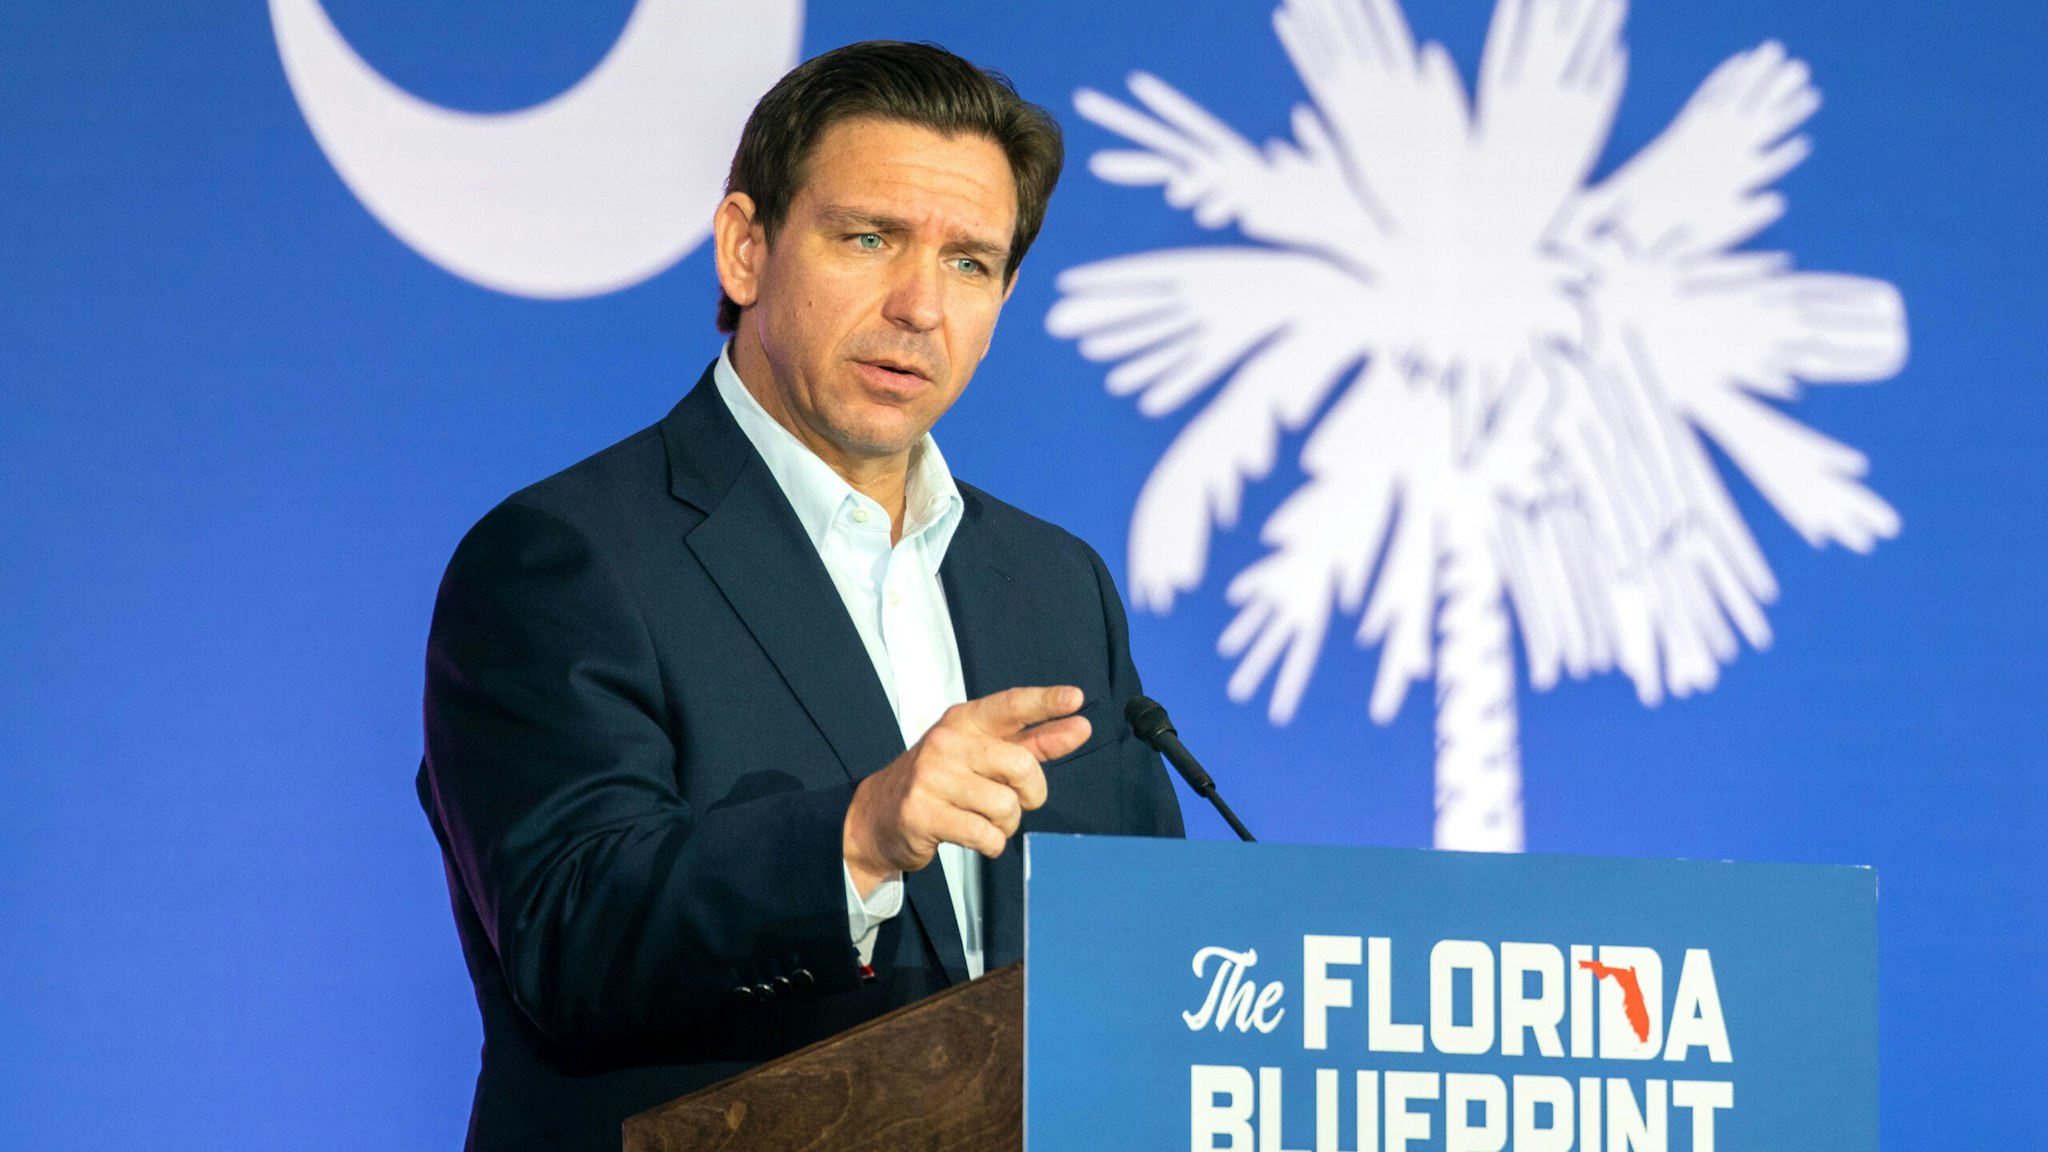 NORTH CHARLESTON, SC - APRIL 19: Florida Gov. Ron DeSantis speaks to a crowd at the North Charleston Coliseum on April 19, 2023 in North Charleston, South Carolina. The governor's appearance marks his first official visit to the "First in the South" presidential primary state amid mounting anticipation of his 2024 presidential candidacy.